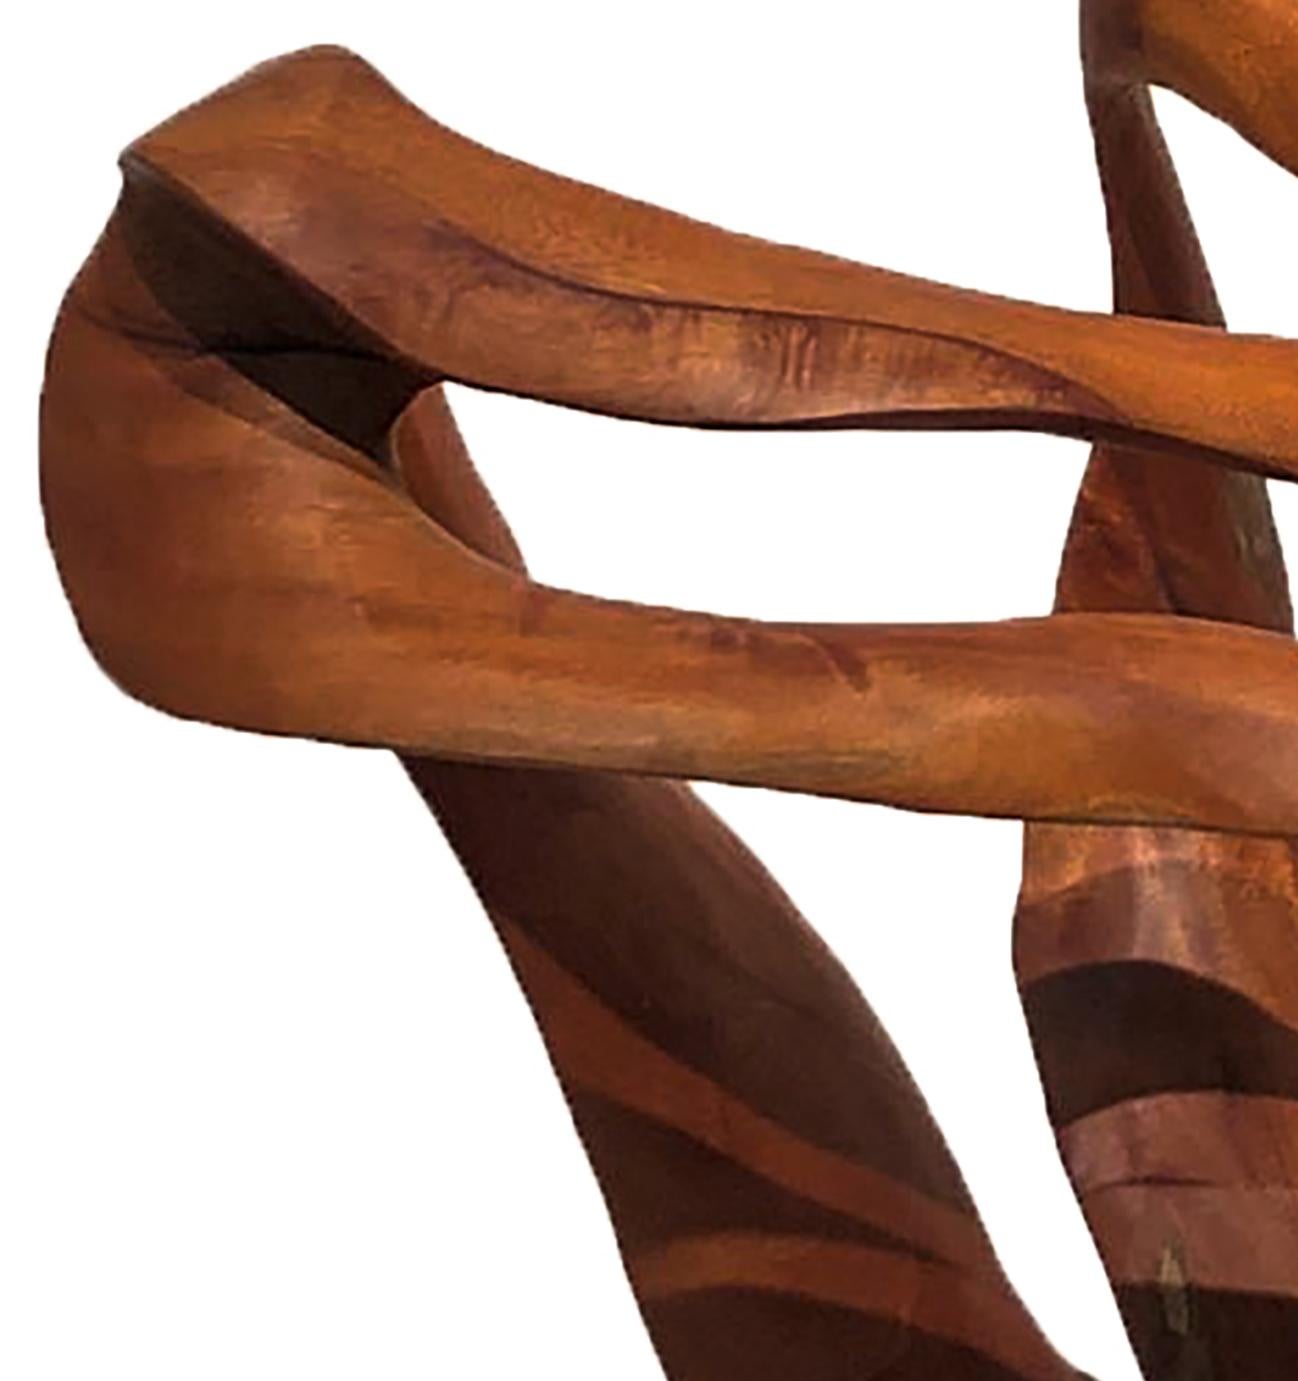 Equilibri - 21st Century, Contemporary, Abstract Sculpture, Mahogany Wood, Root 1